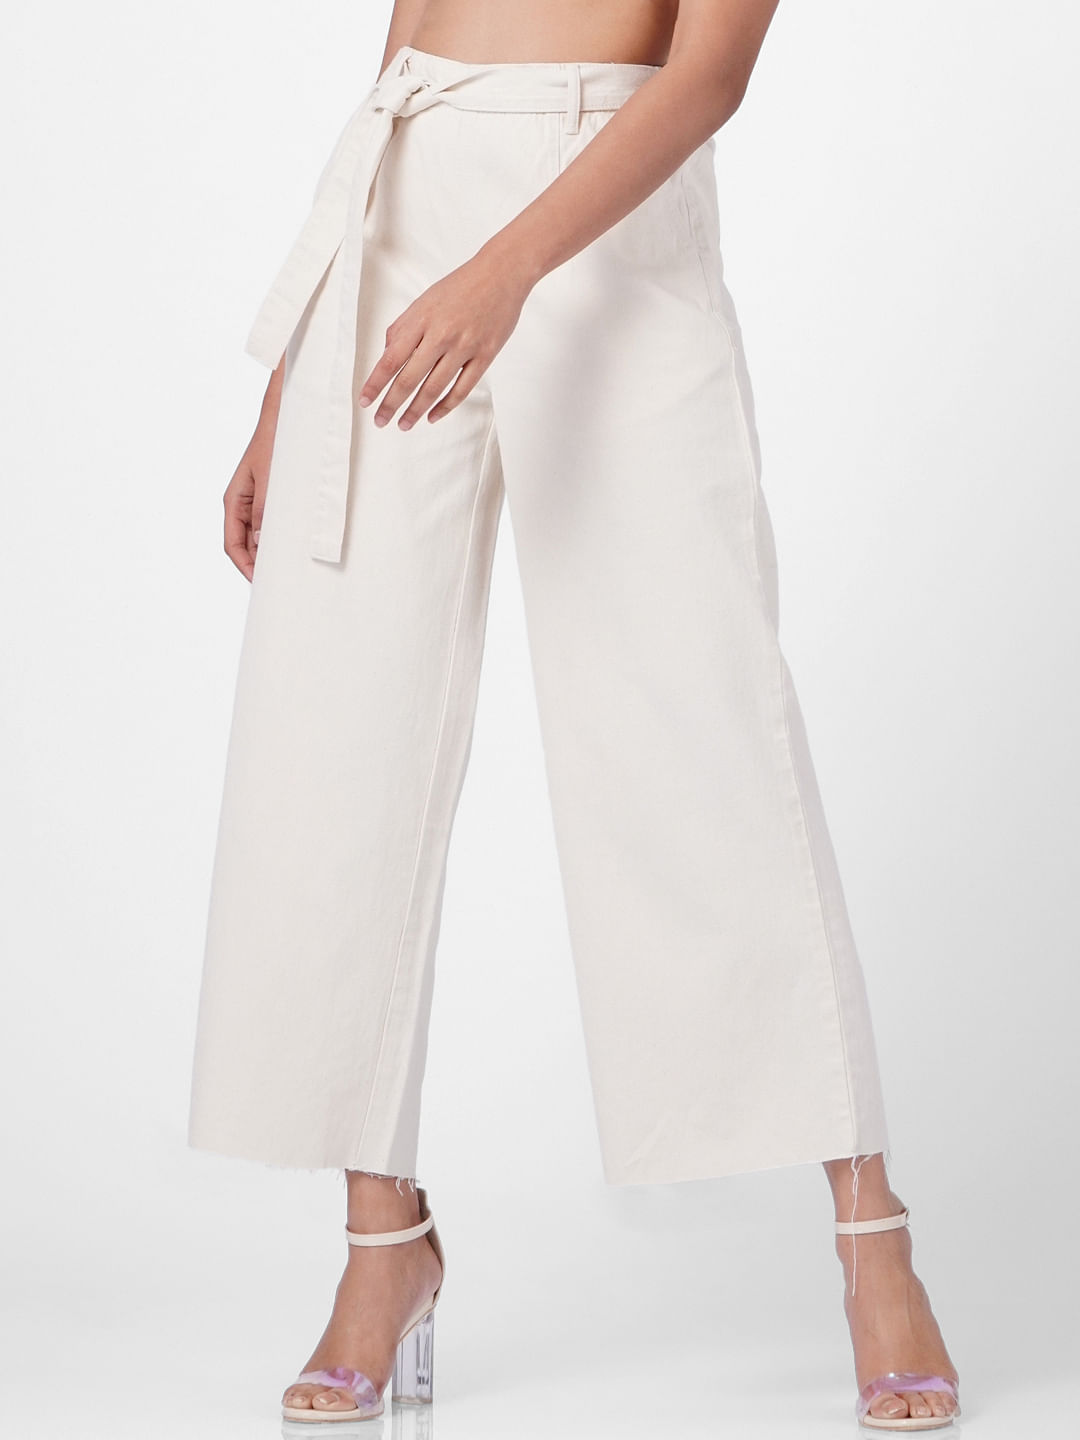 Style Them With Denim Culottes | The 2019 Way of Wearing Kitten Heels and  Where to Buy Them | POPSUGAR Fashion UK Photo 20